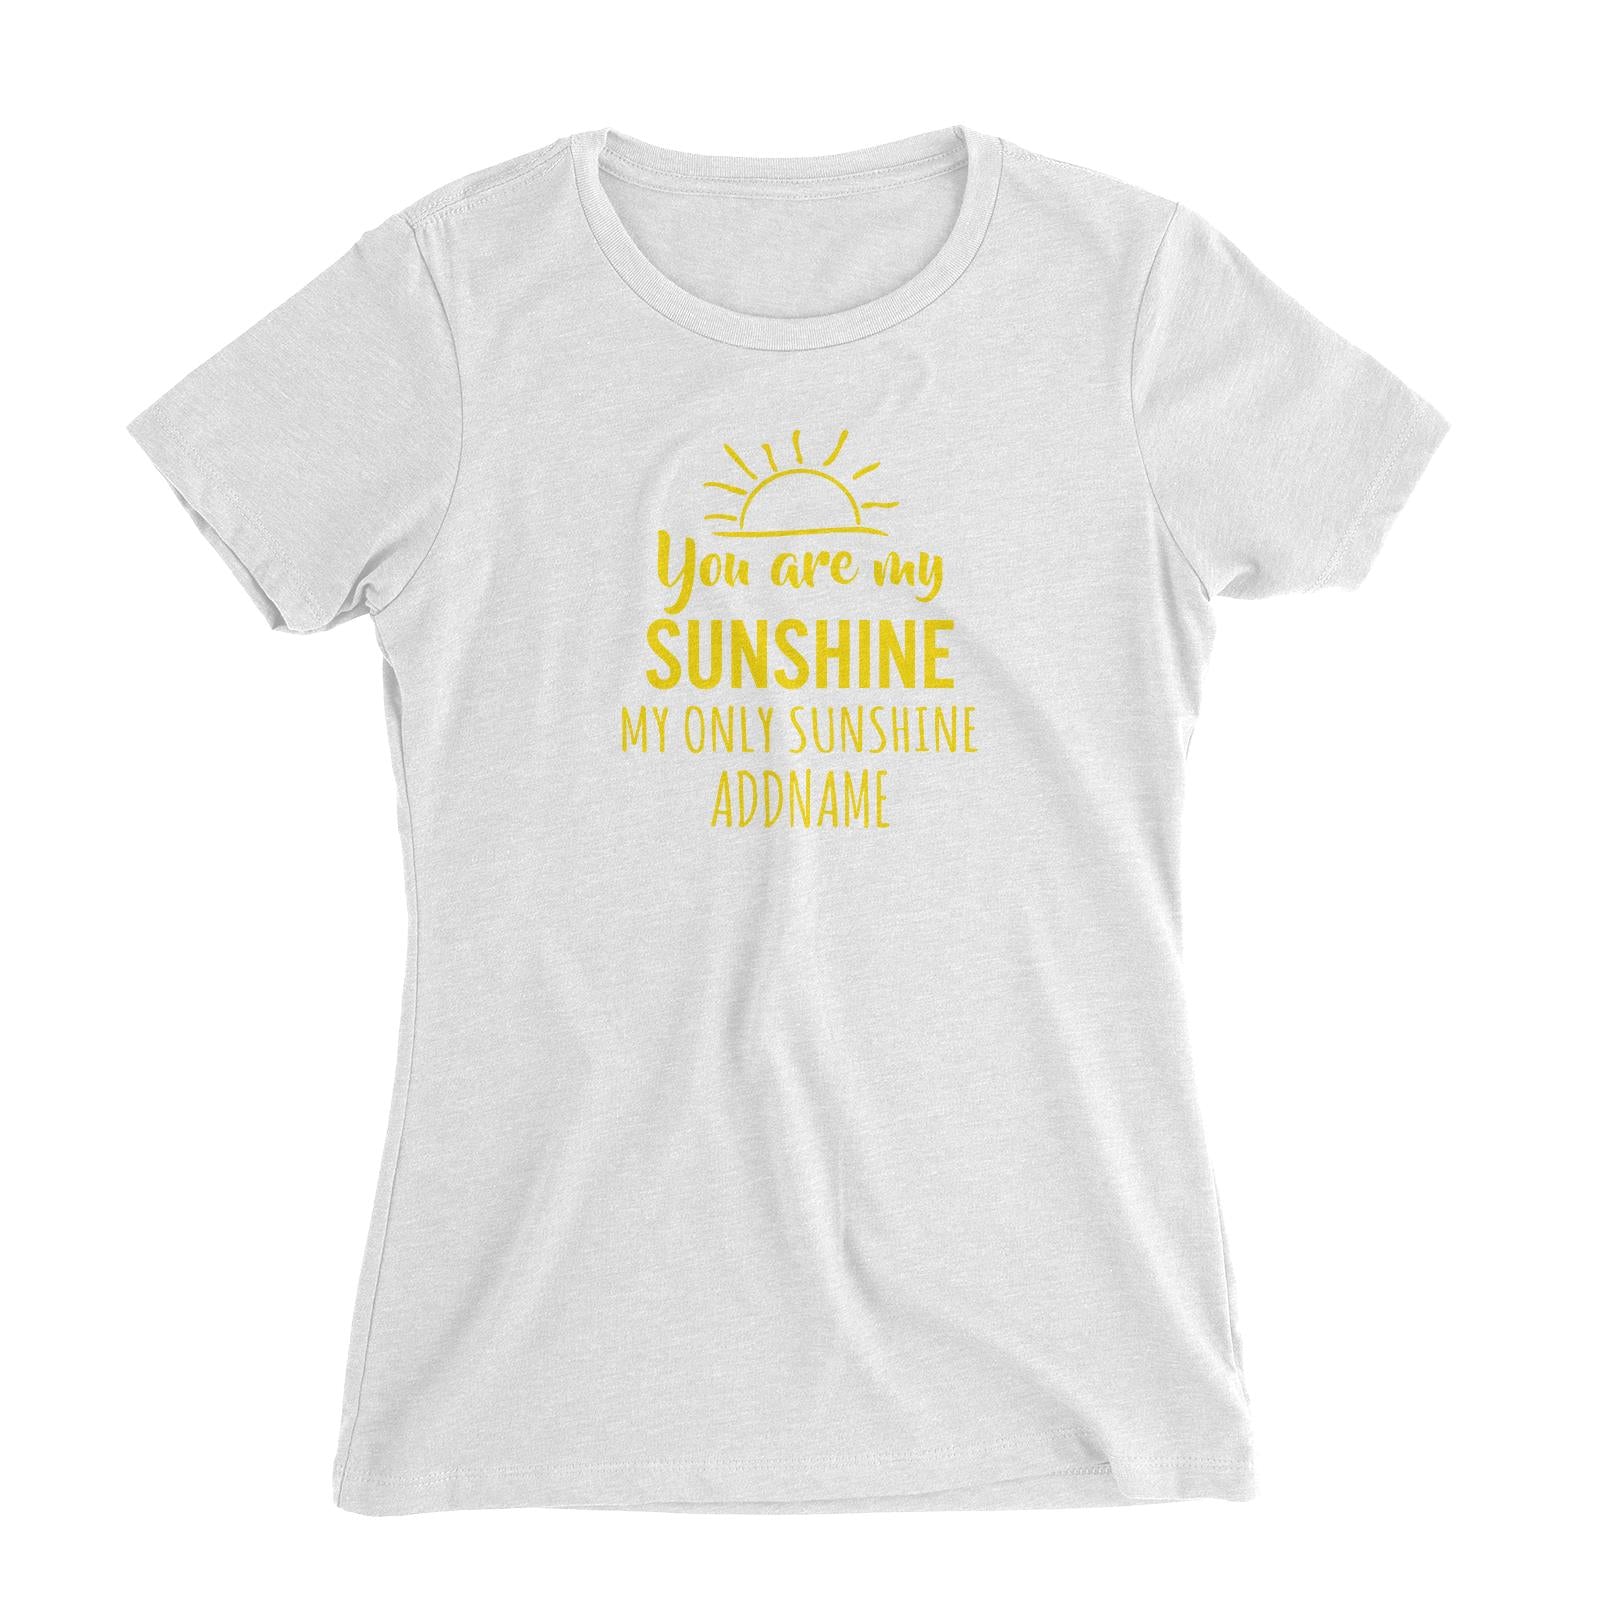 You are my sunshine my only sunshine Women's Slim Fit T-Shirt